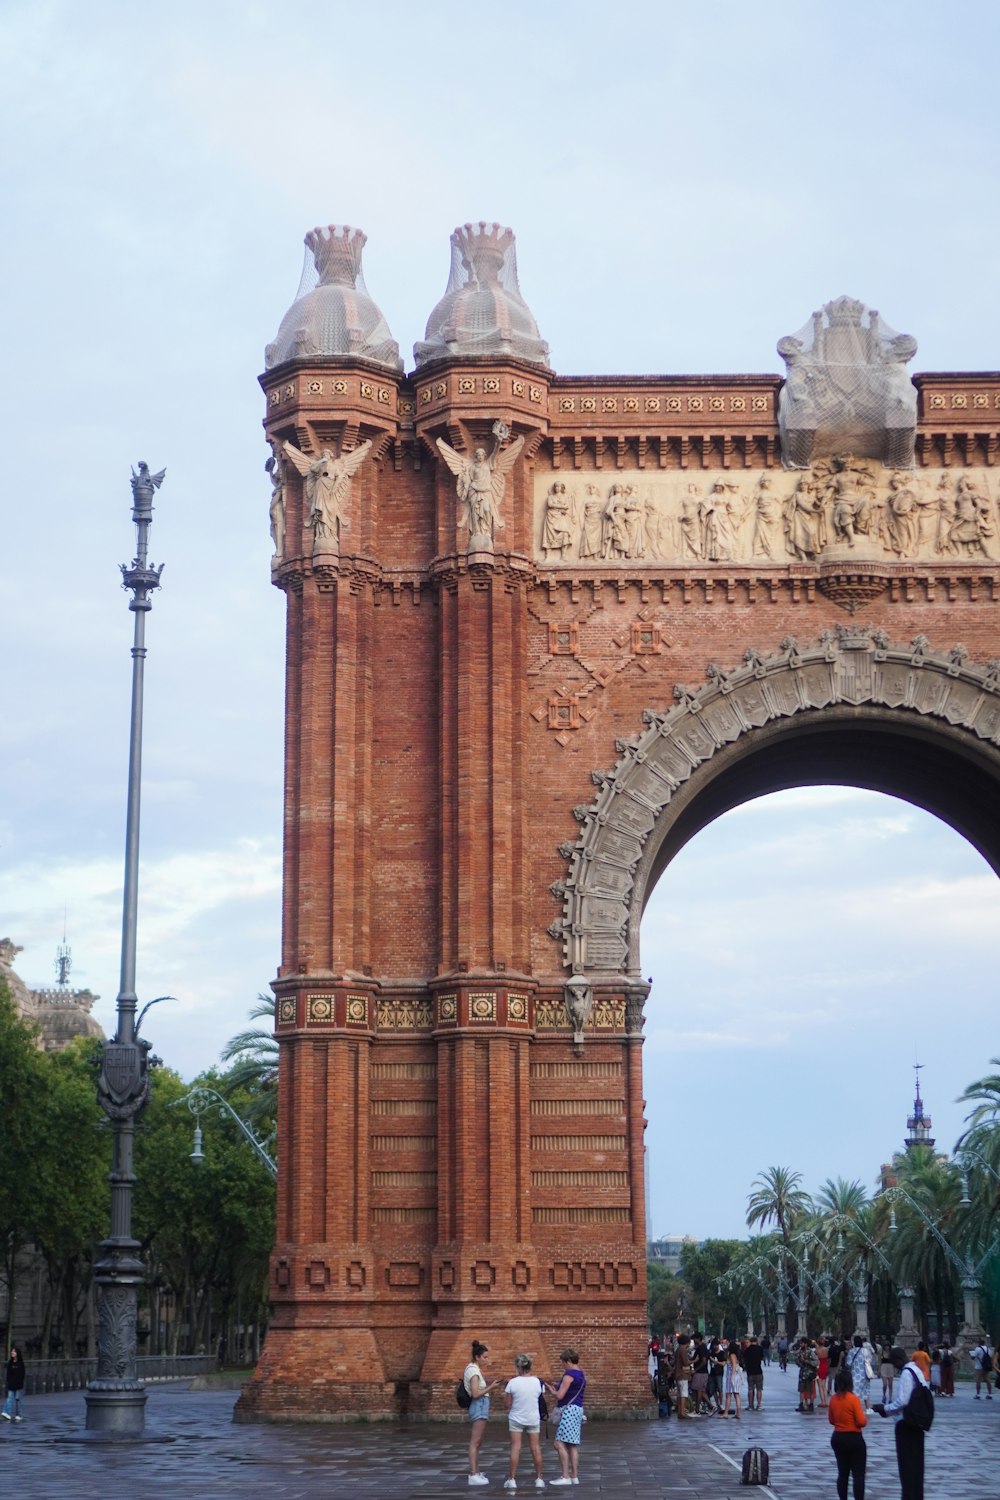 a large stone structure with a dome with Arc de Triomf in the background